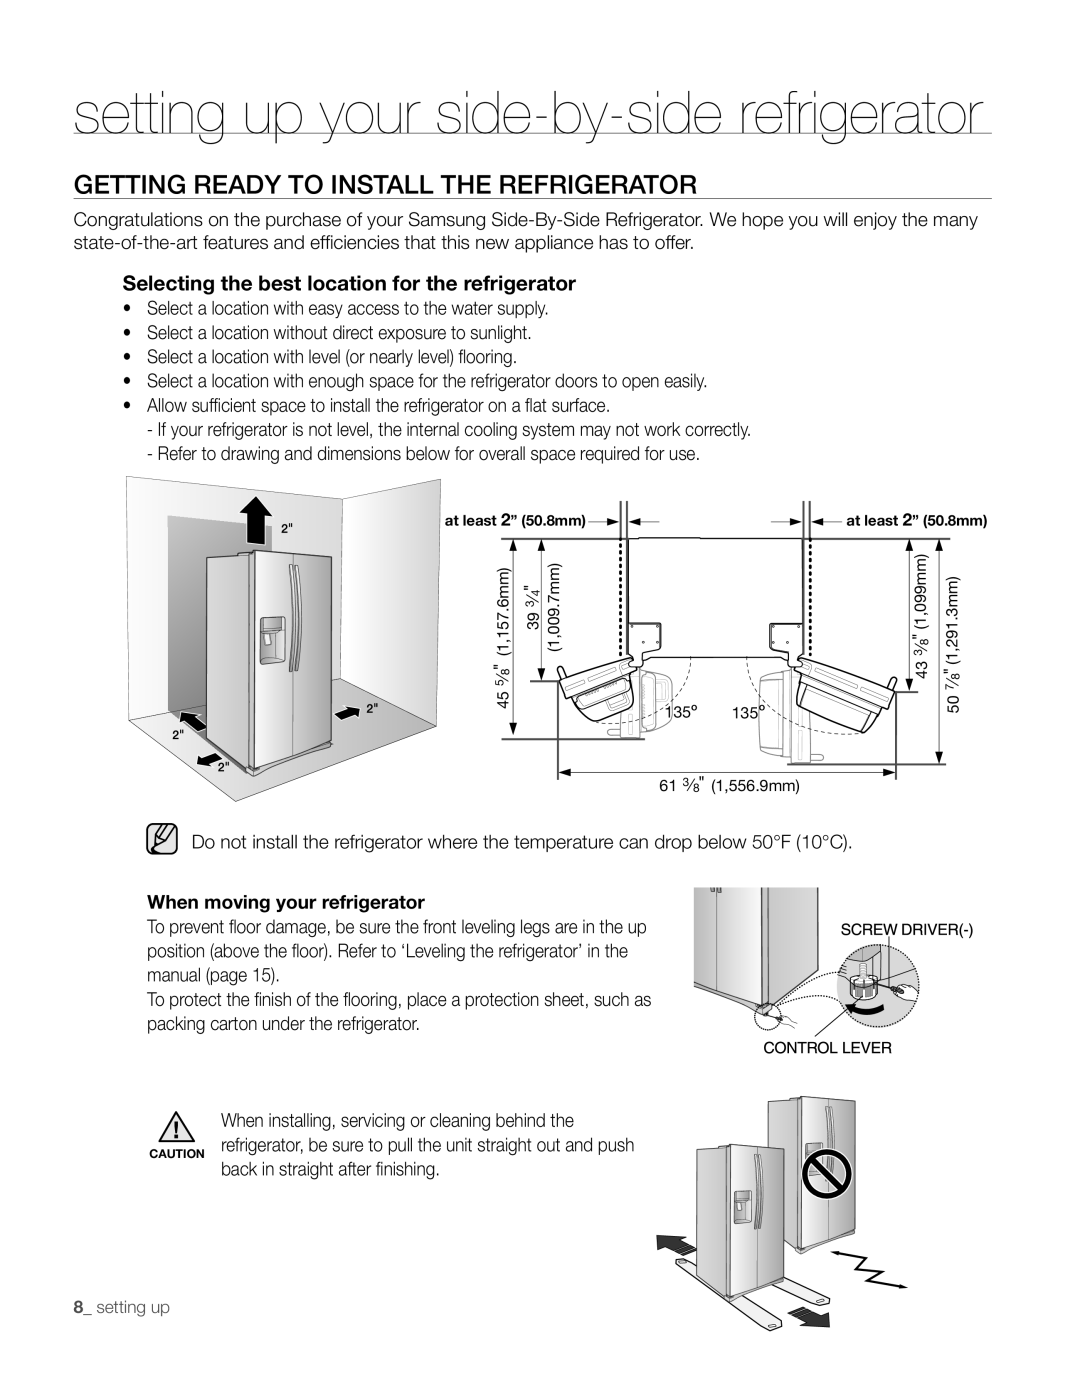 Samsung RS267TDBP user manual setting up your side-by-side refrigerator, Getting ready to install the refrigerator 